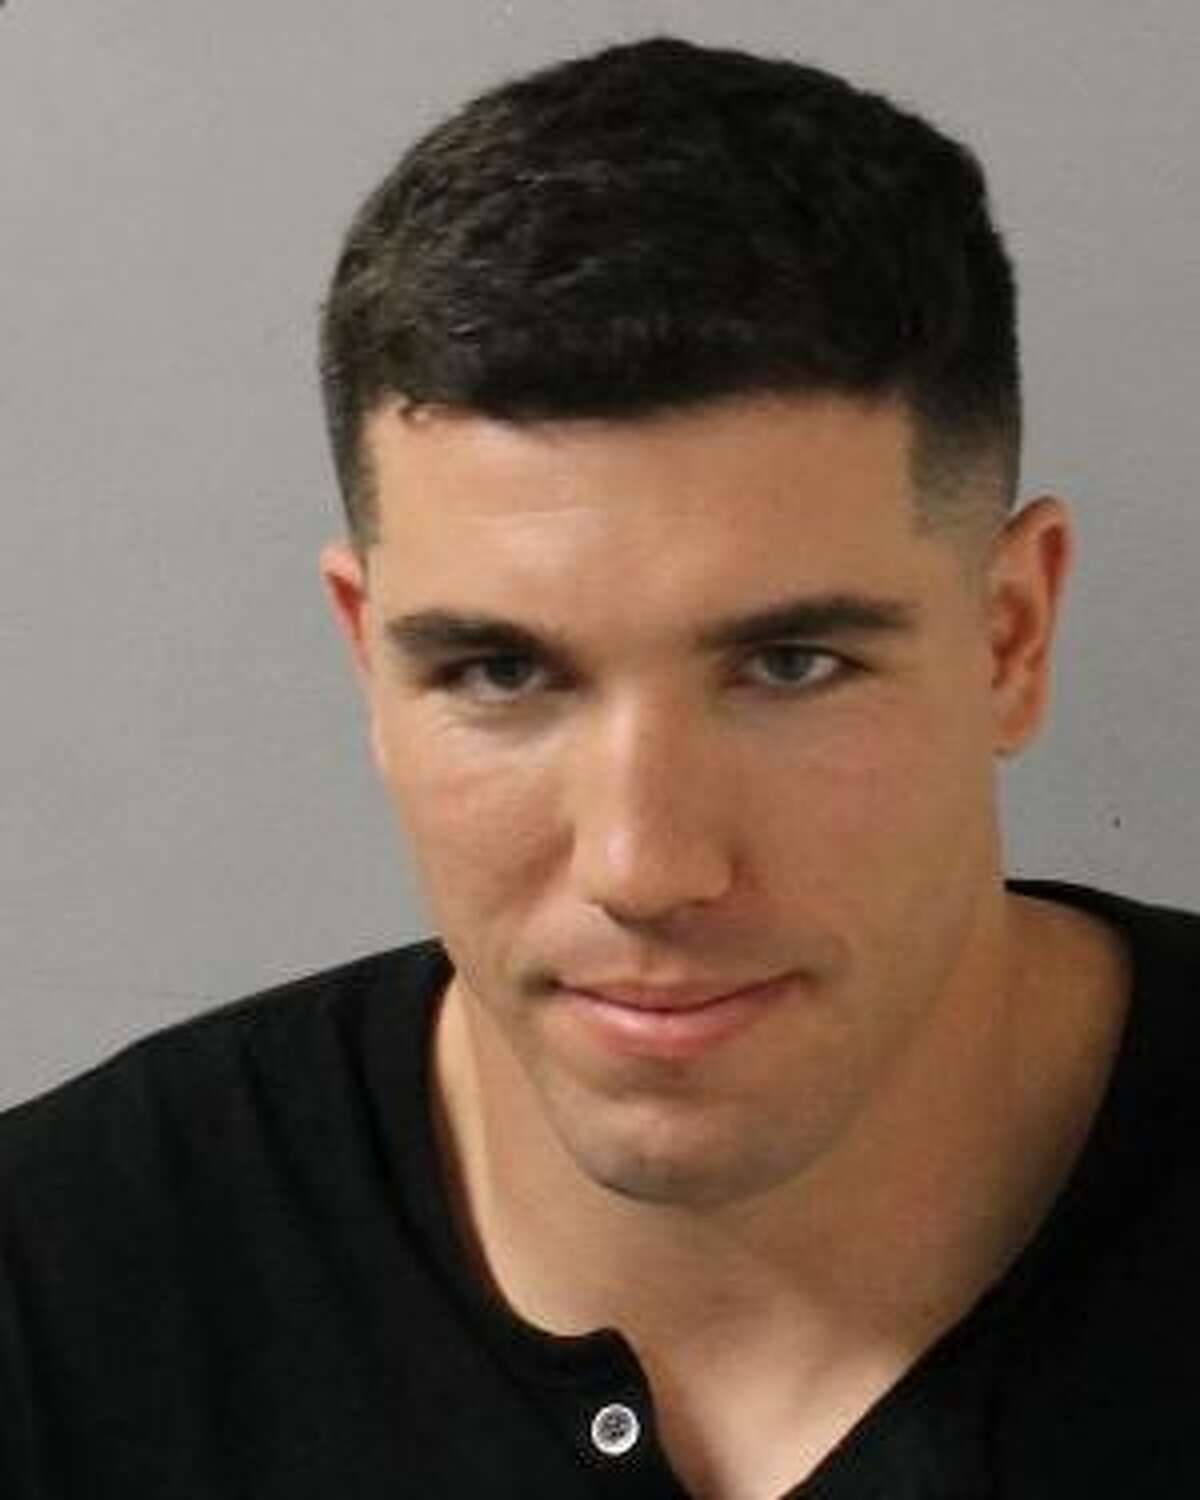 Houston Texans tight end Ryan Griffin was arrested Friday night in Nashville, Tennessee.